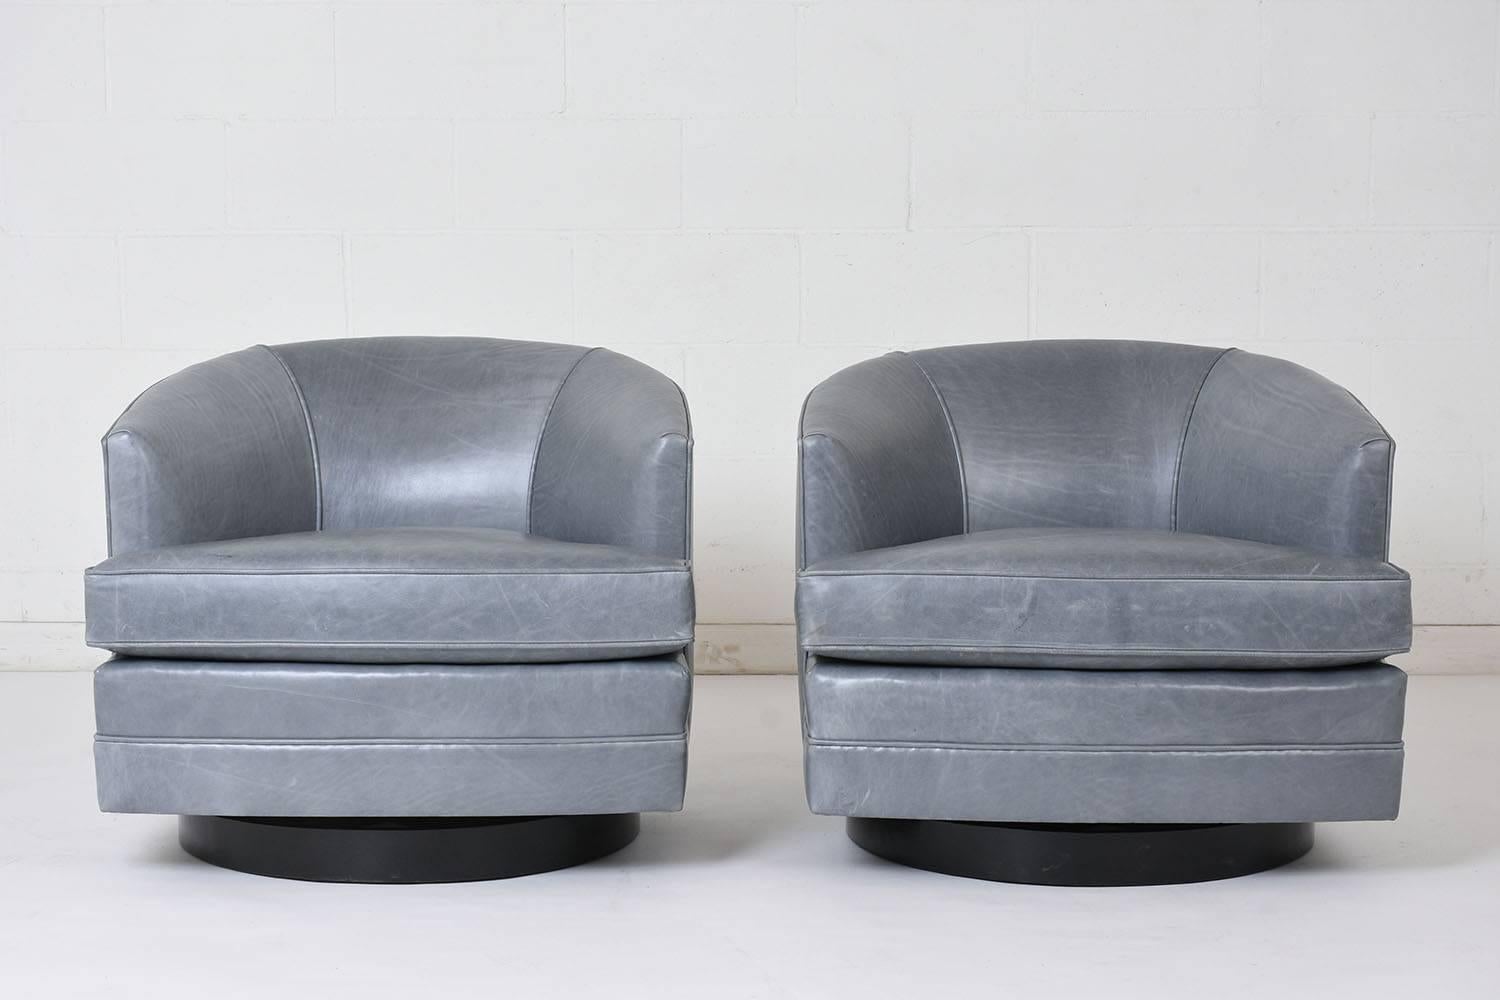 This pair of 1960s Mid-Century Modern style lounge chairs is made in the manner of Milo Baughman. The chairs have recently been upholstered in a blue gray leather fabric with single piping trim details. The chairs have a single removable cushion